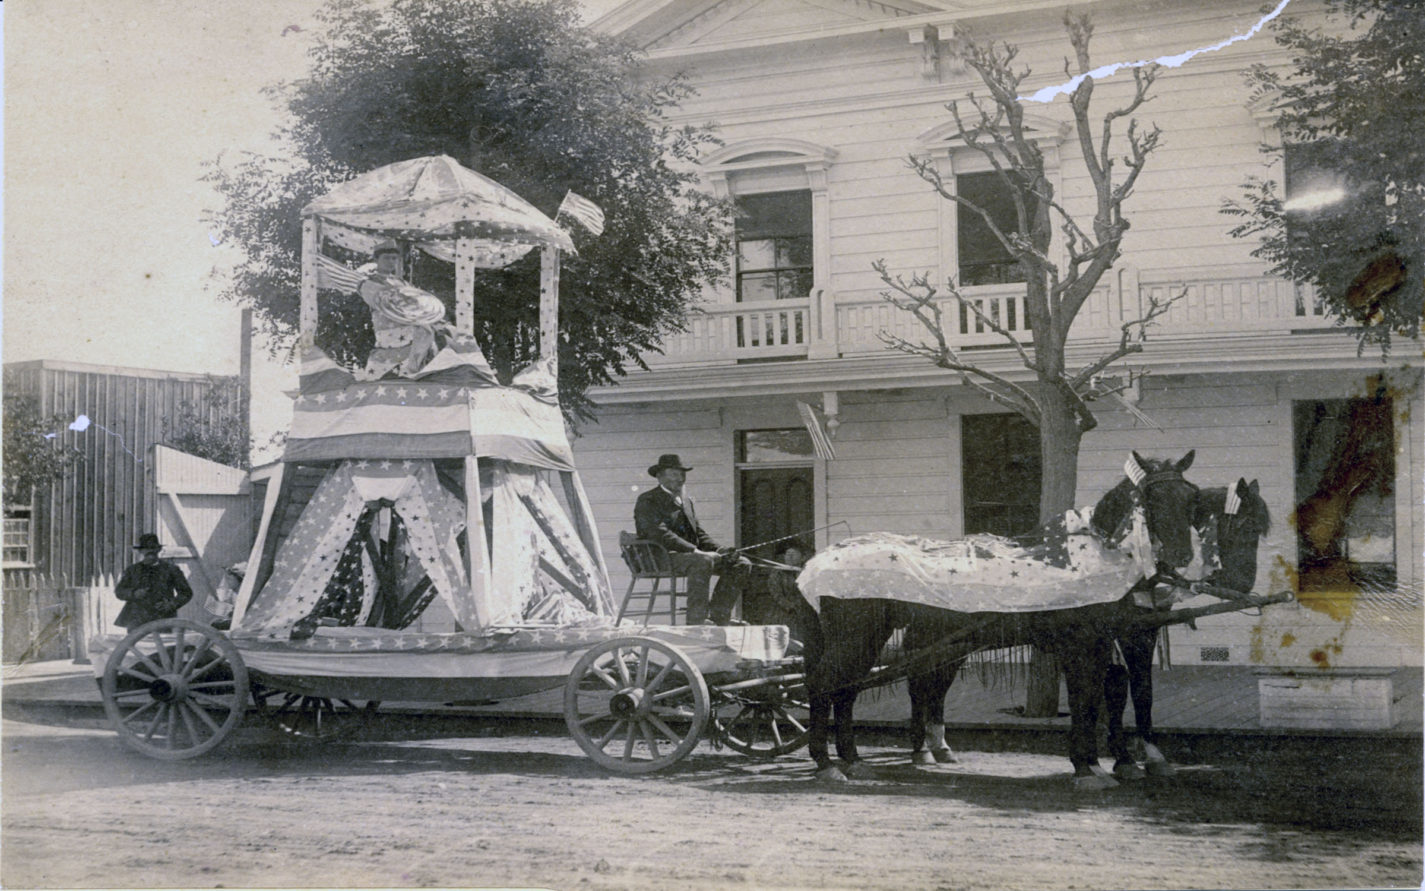 Young woman with a crown on July Fourth Float pulled by horses in front of the Tremont House on Main Street in Redwood City circa 1880s